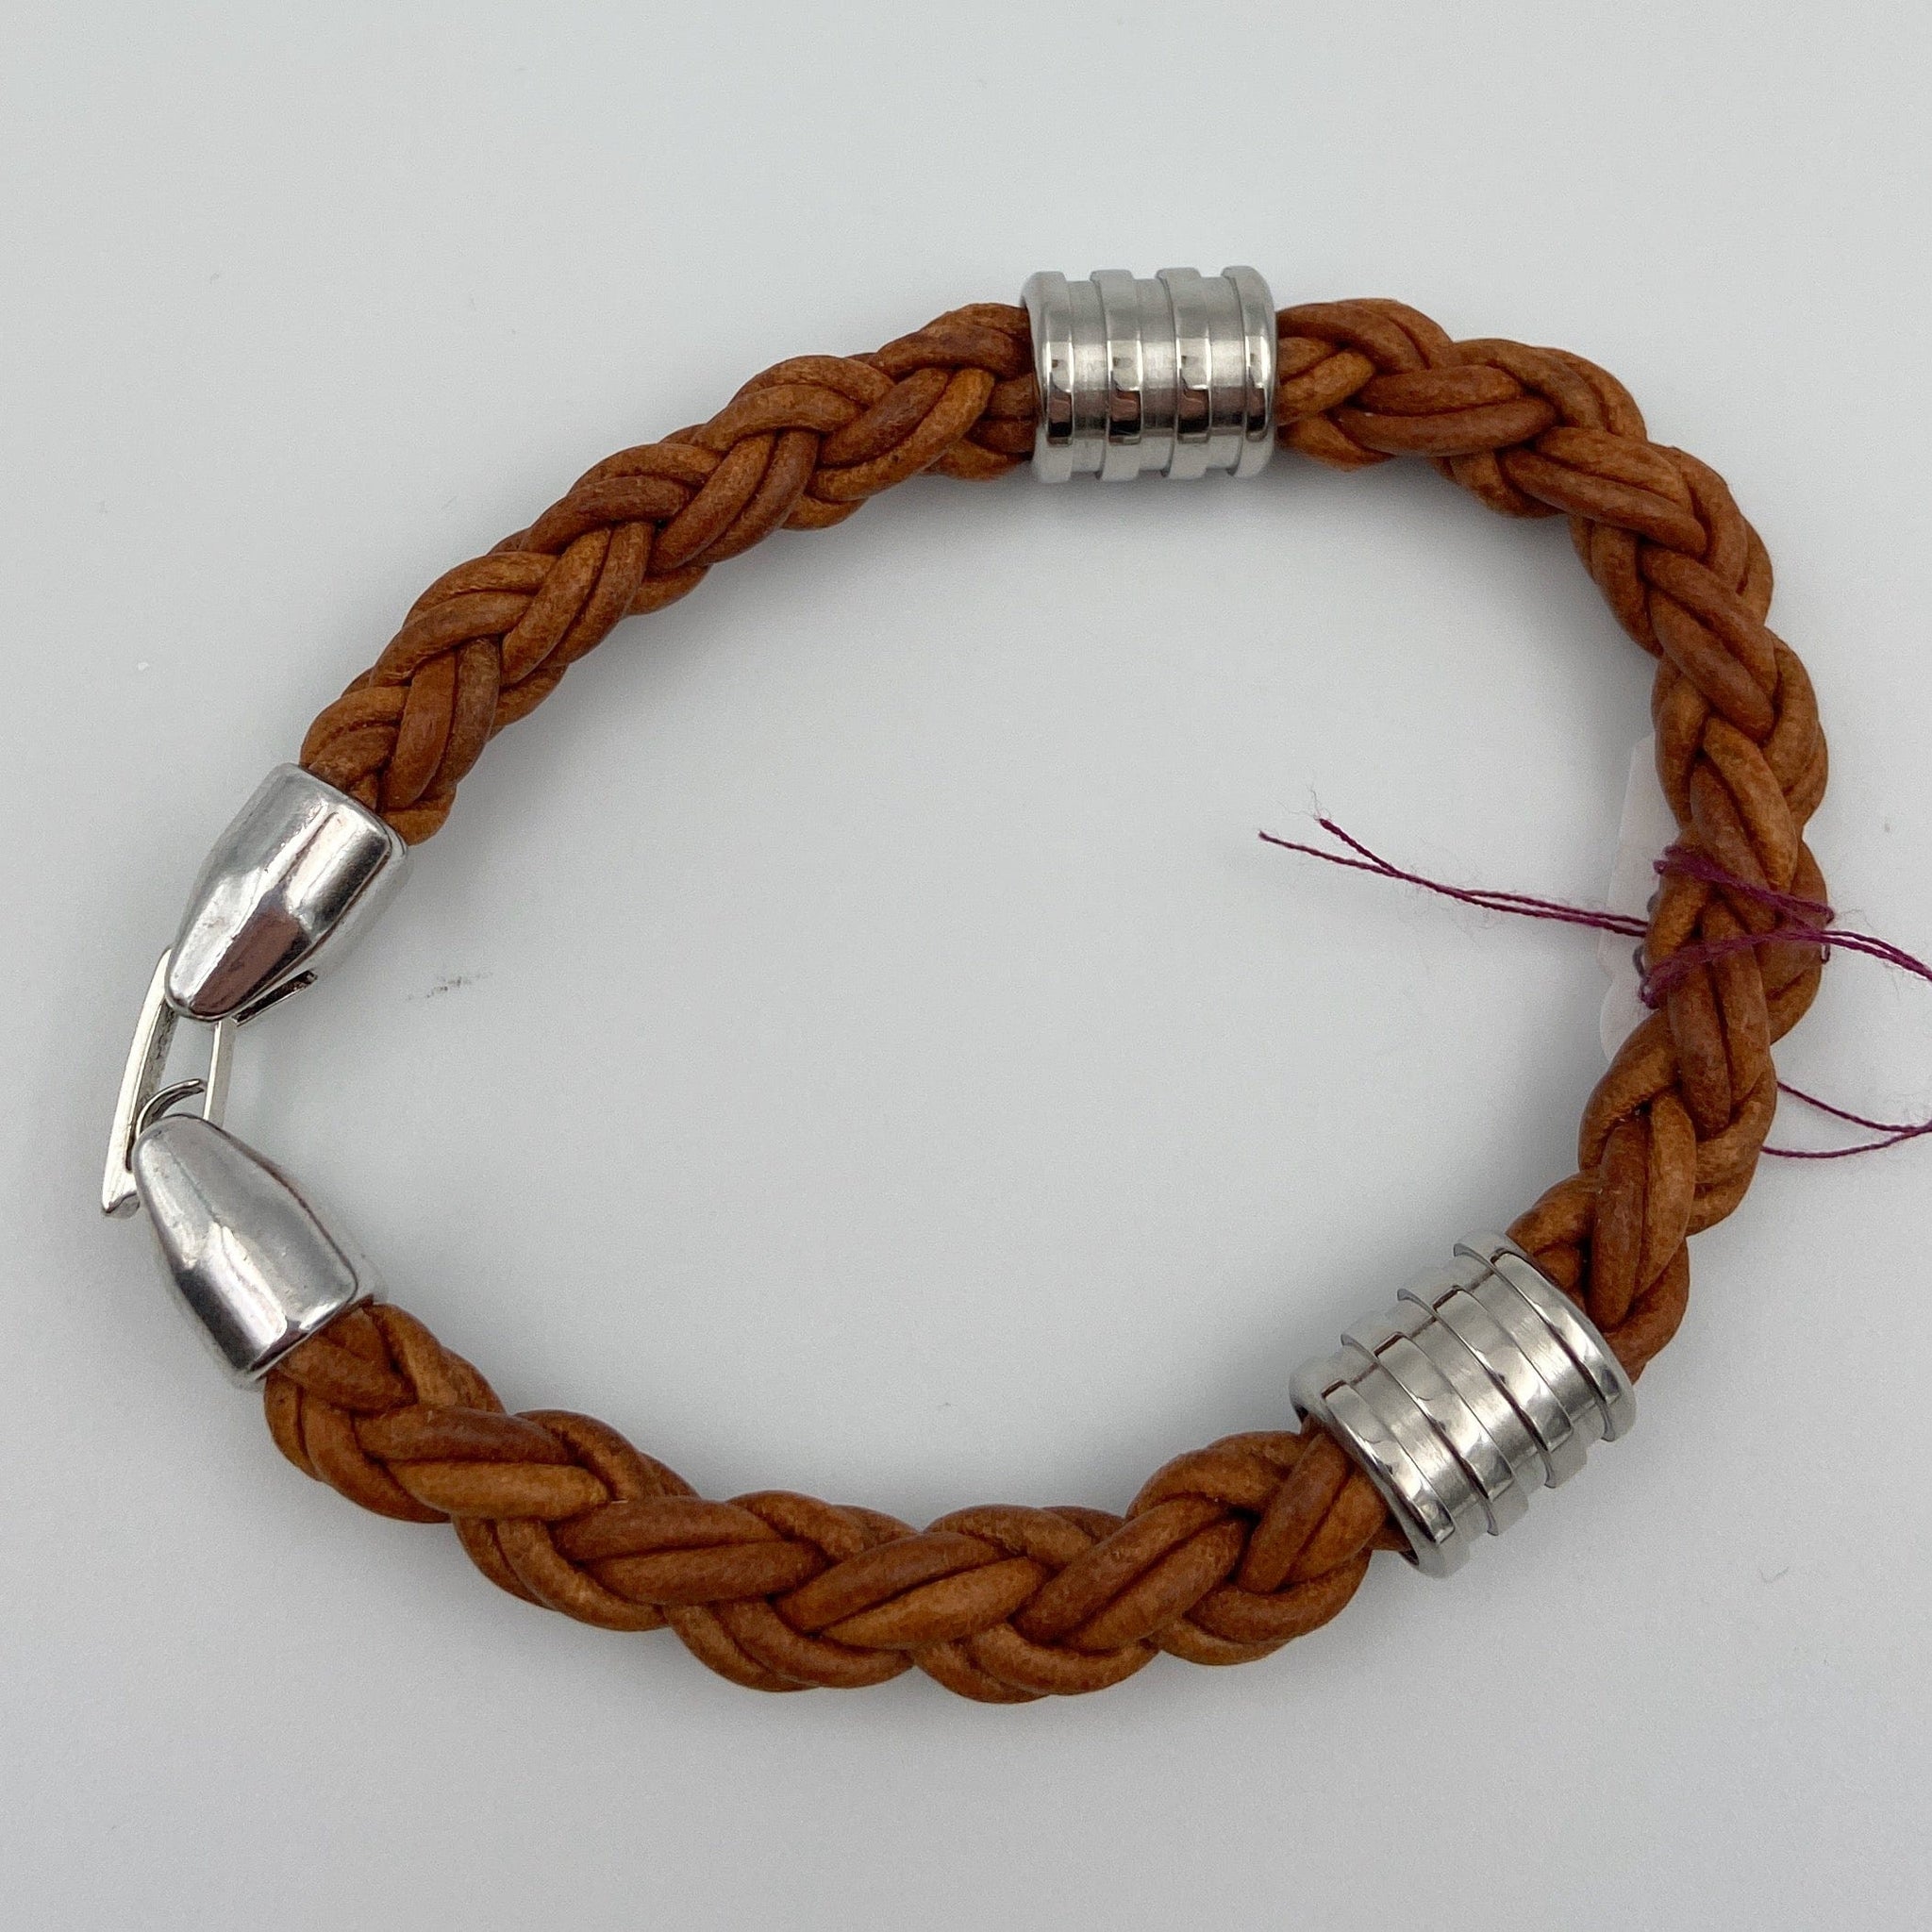 Single Braided Leather Bracelet with Stainless Steel Clasp - Five and Divine